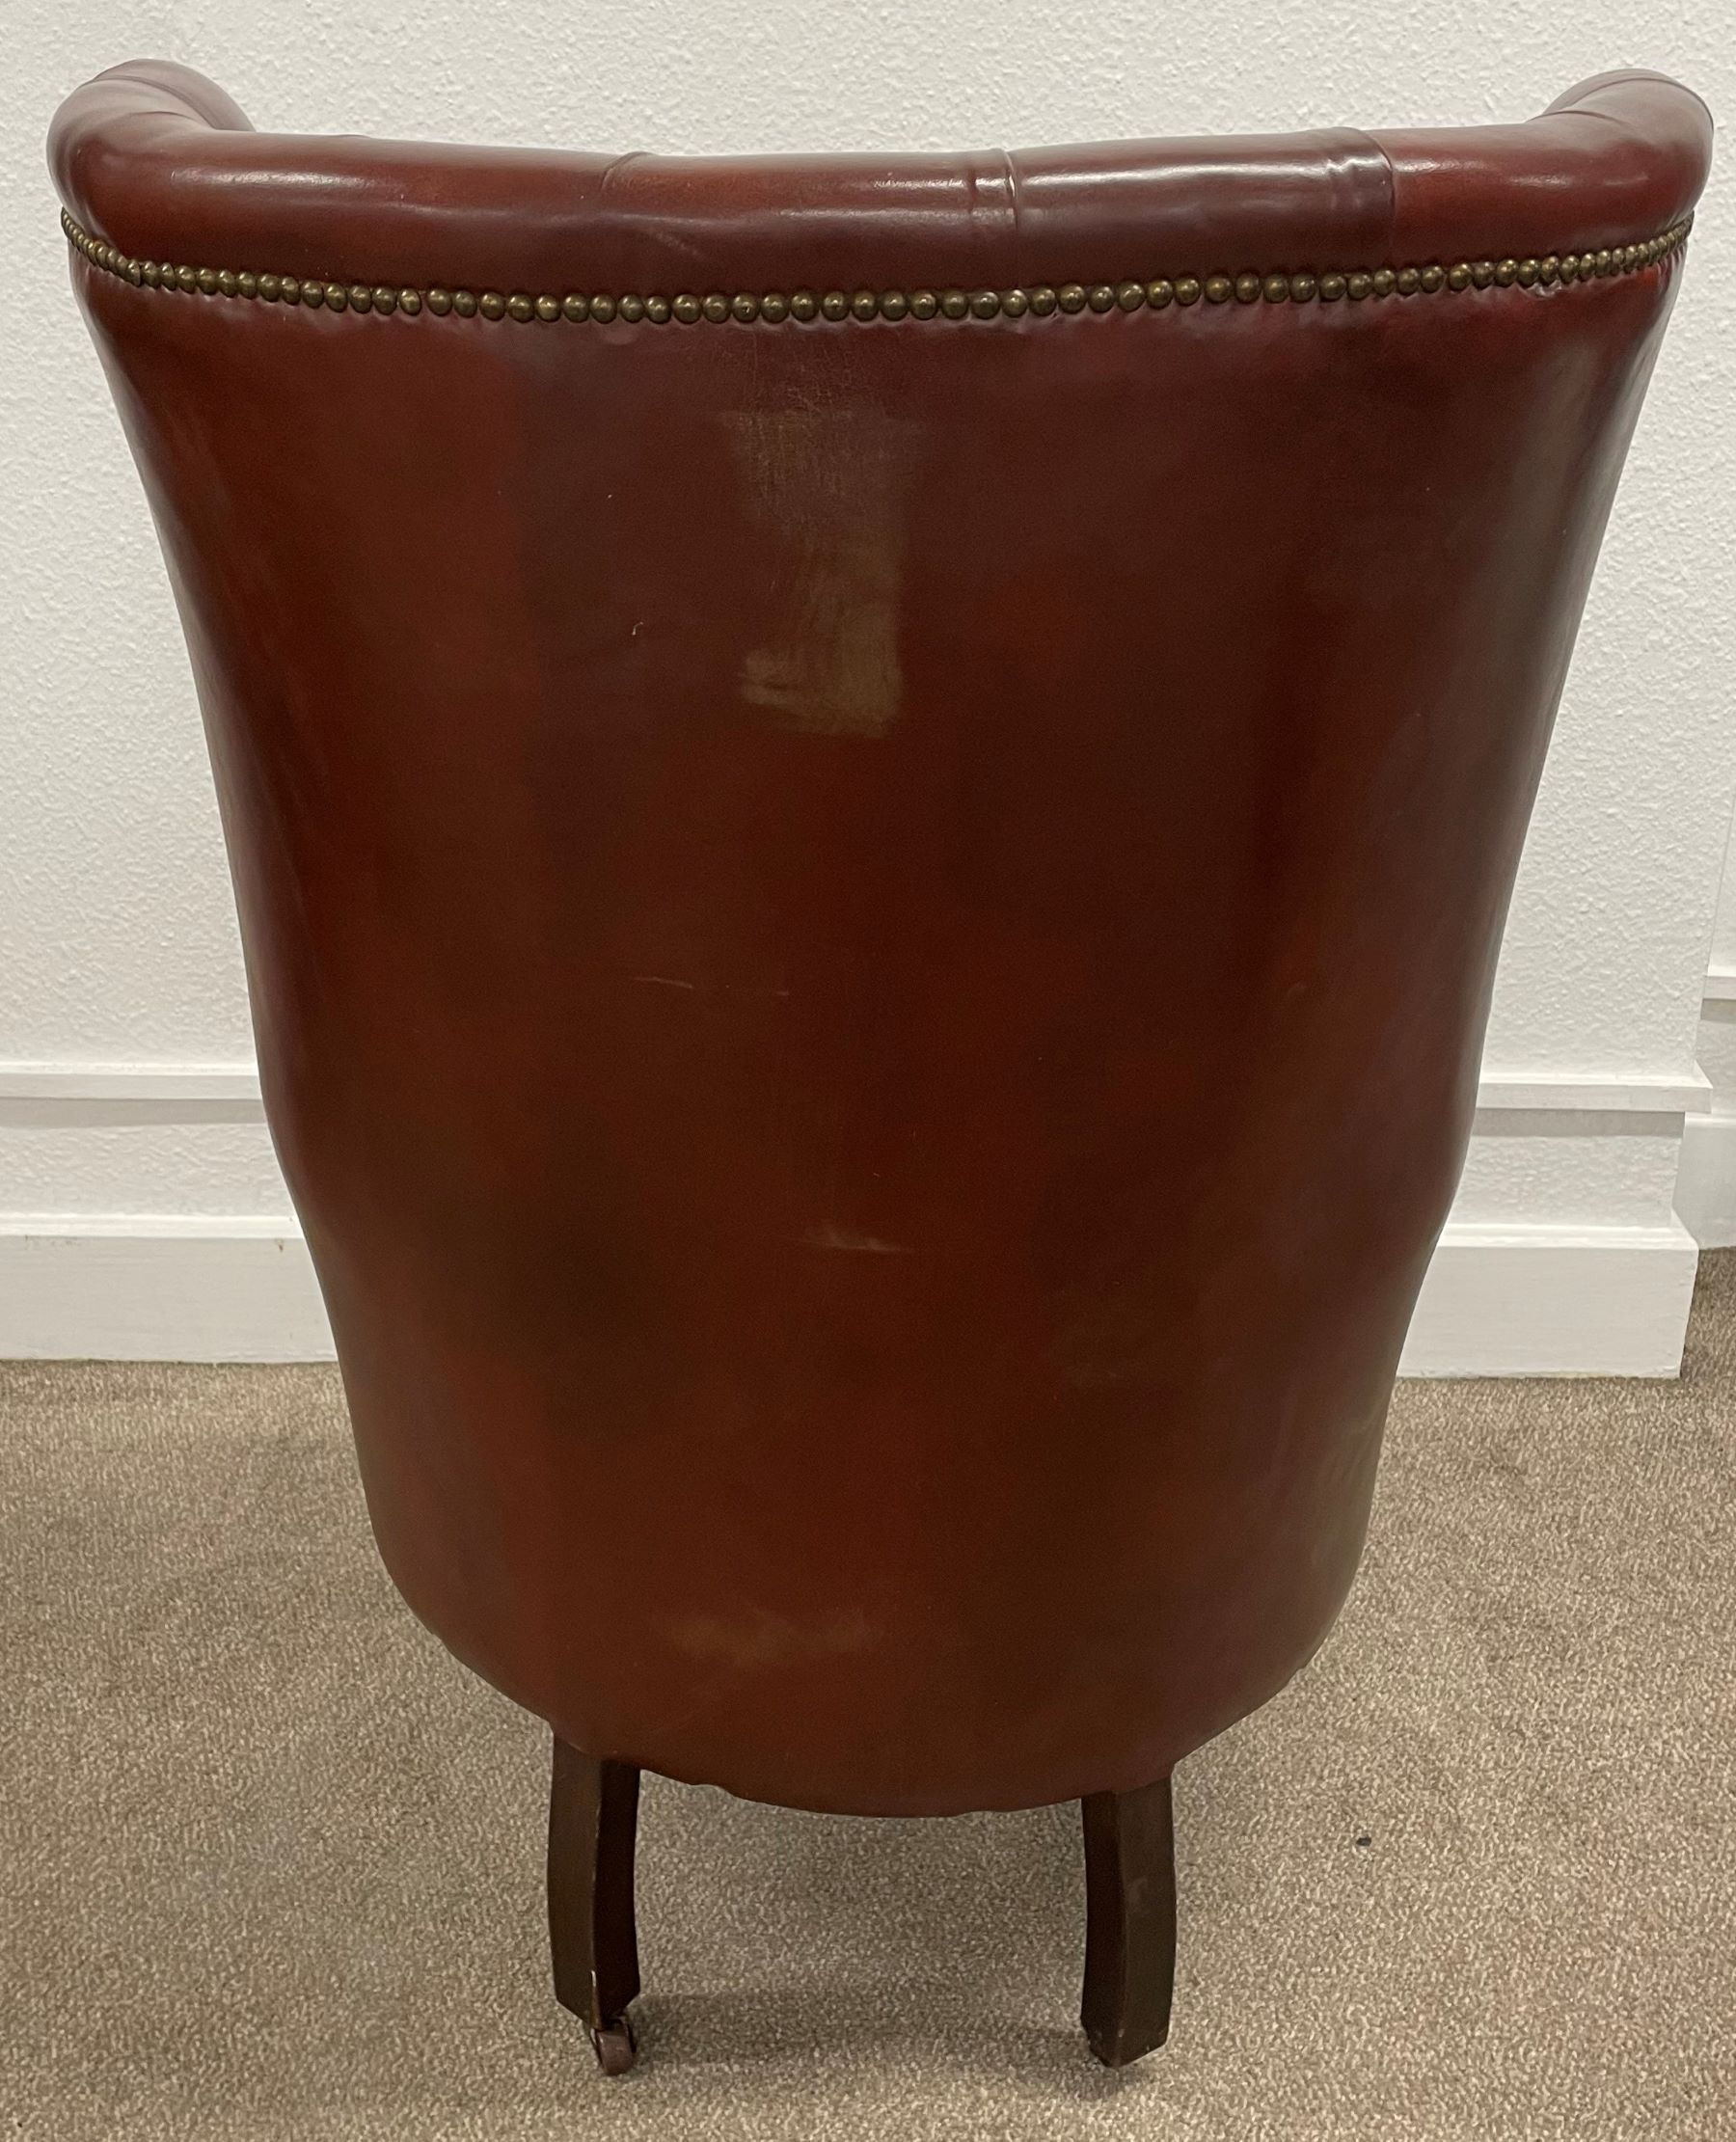 Possibly late 19th century leather button back barrel armchair on turned legs - Image 3 of 6